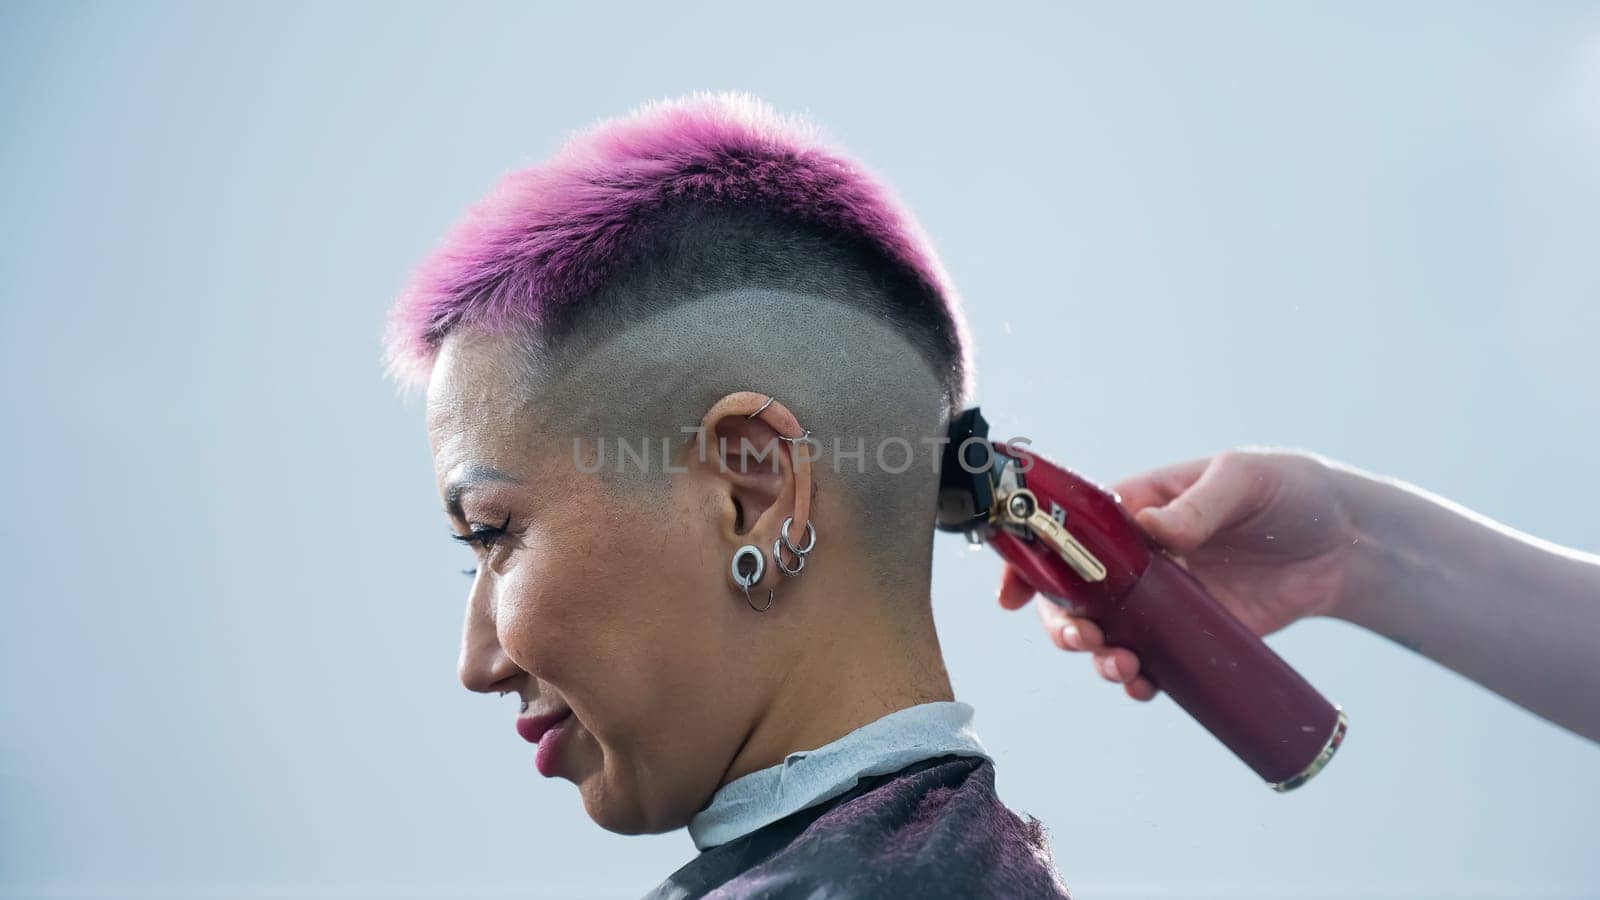 The hairdresser shaves the back of the head of a female client. Rear view of a woman with short pink hair in a barbershop